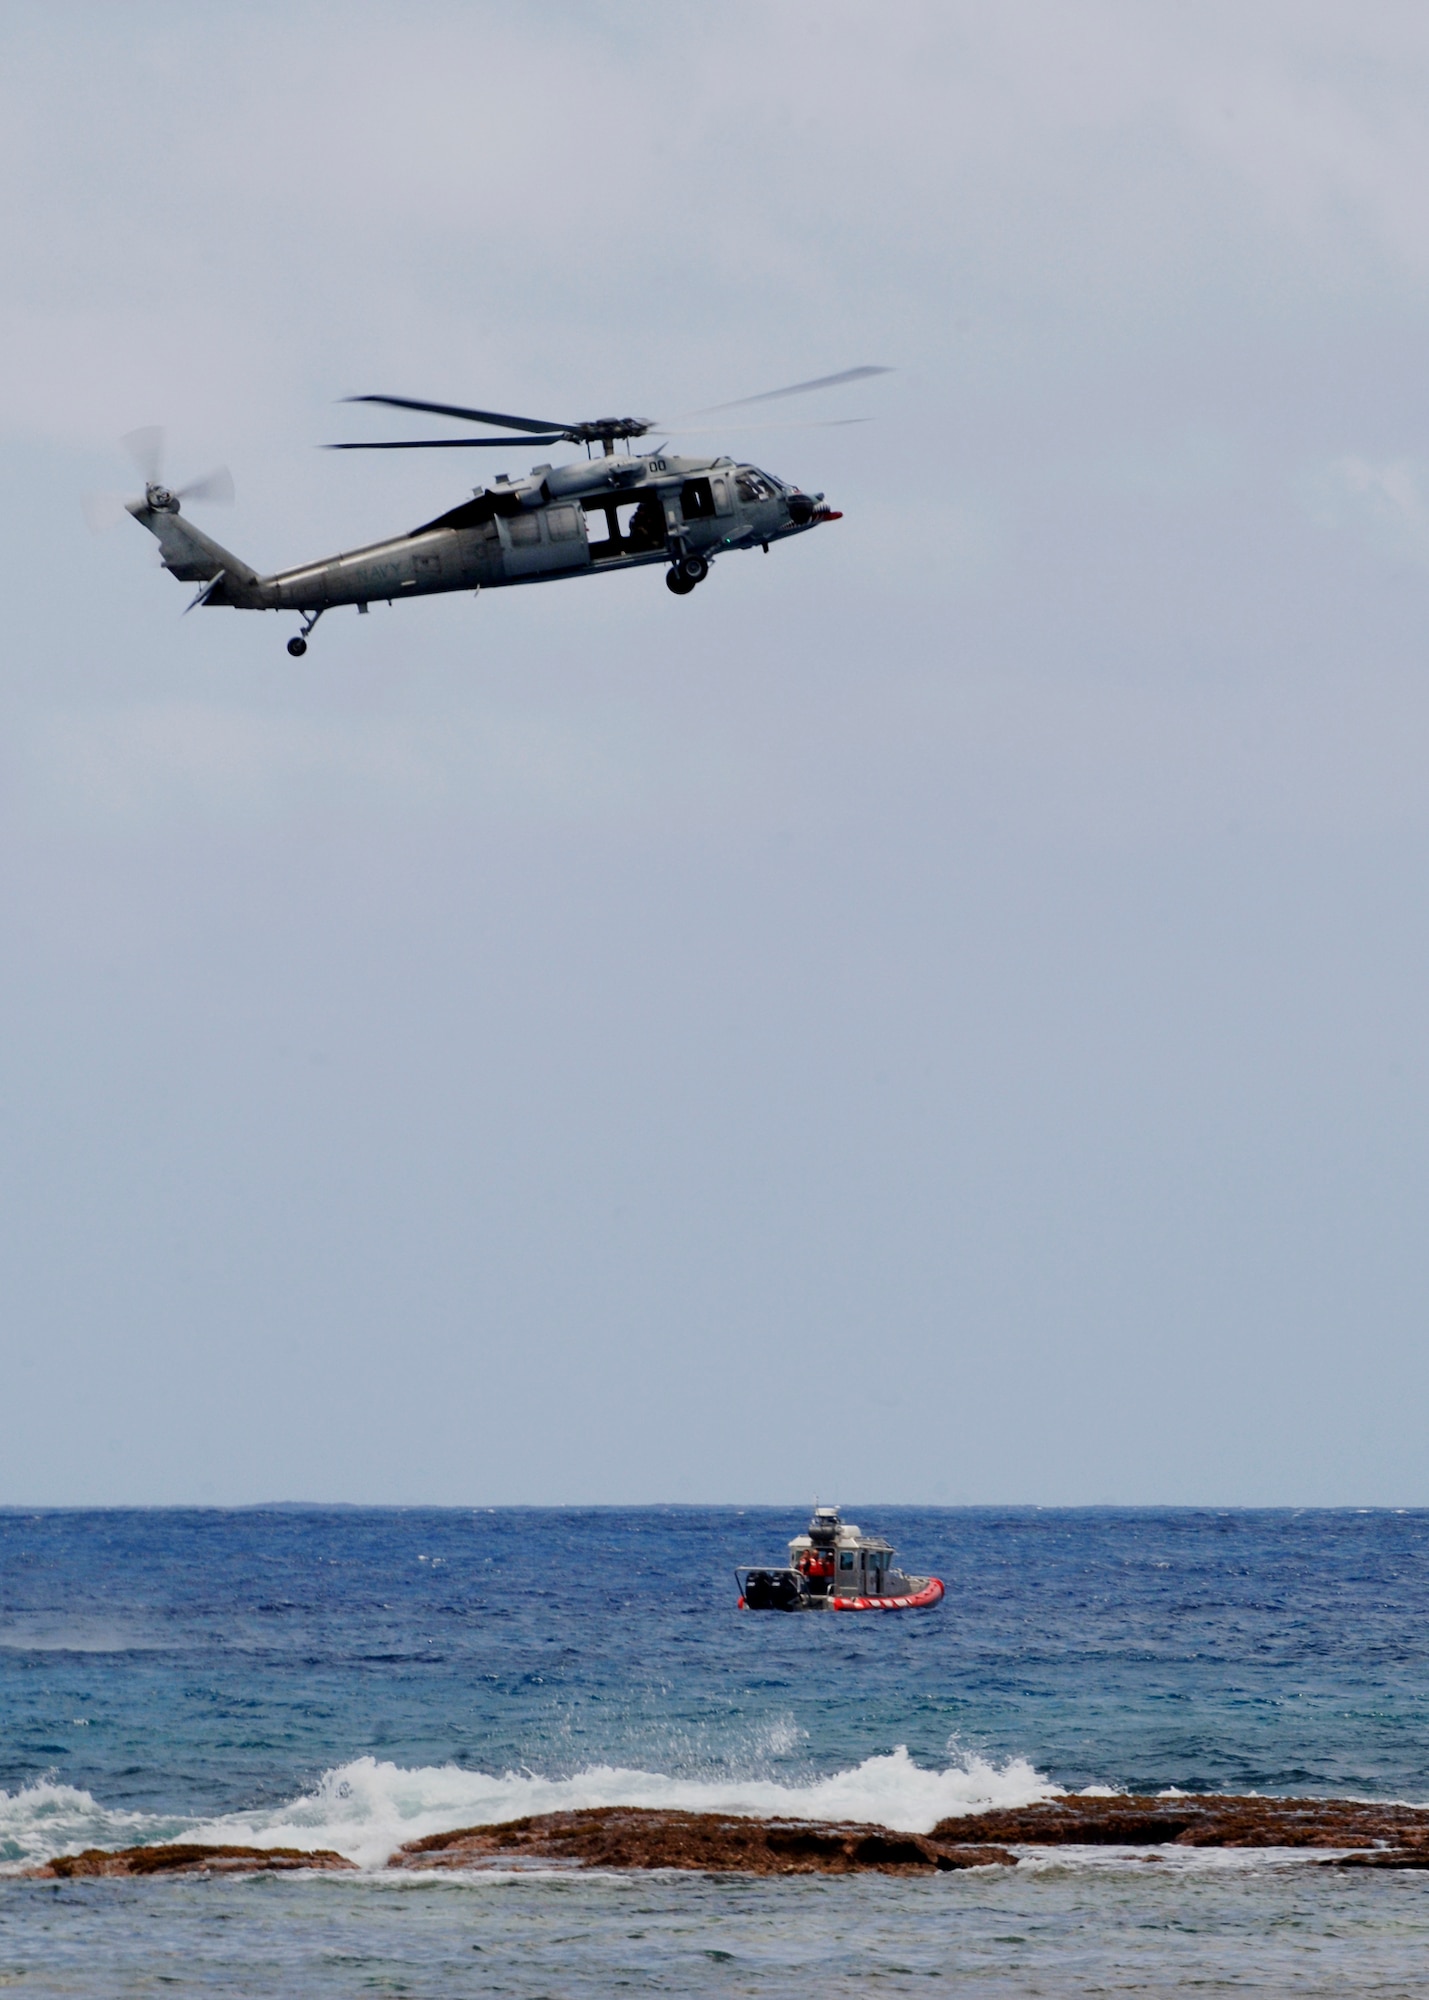 U.S. Navy Helicopter Sea Combat Squadron 25 a tenant unit out of Andersen Air Force Base and the U.S. Coast Guard participate in the water search and rescue exercise May 8 at Tarague Beach. The exercise enhances the tactical inter-operability within the island of Guam for water rescue emergencies in realistic ocean environment. The SAREX also included members from Guam's police and fire departments, the Navy's Helicopter Sea Combat Squadron 25, Coast Guard, Jeff's Pirates Cove Rescue Team. (U.S. Air Force photo by Airman 1st Class Nichelle Griffiths)